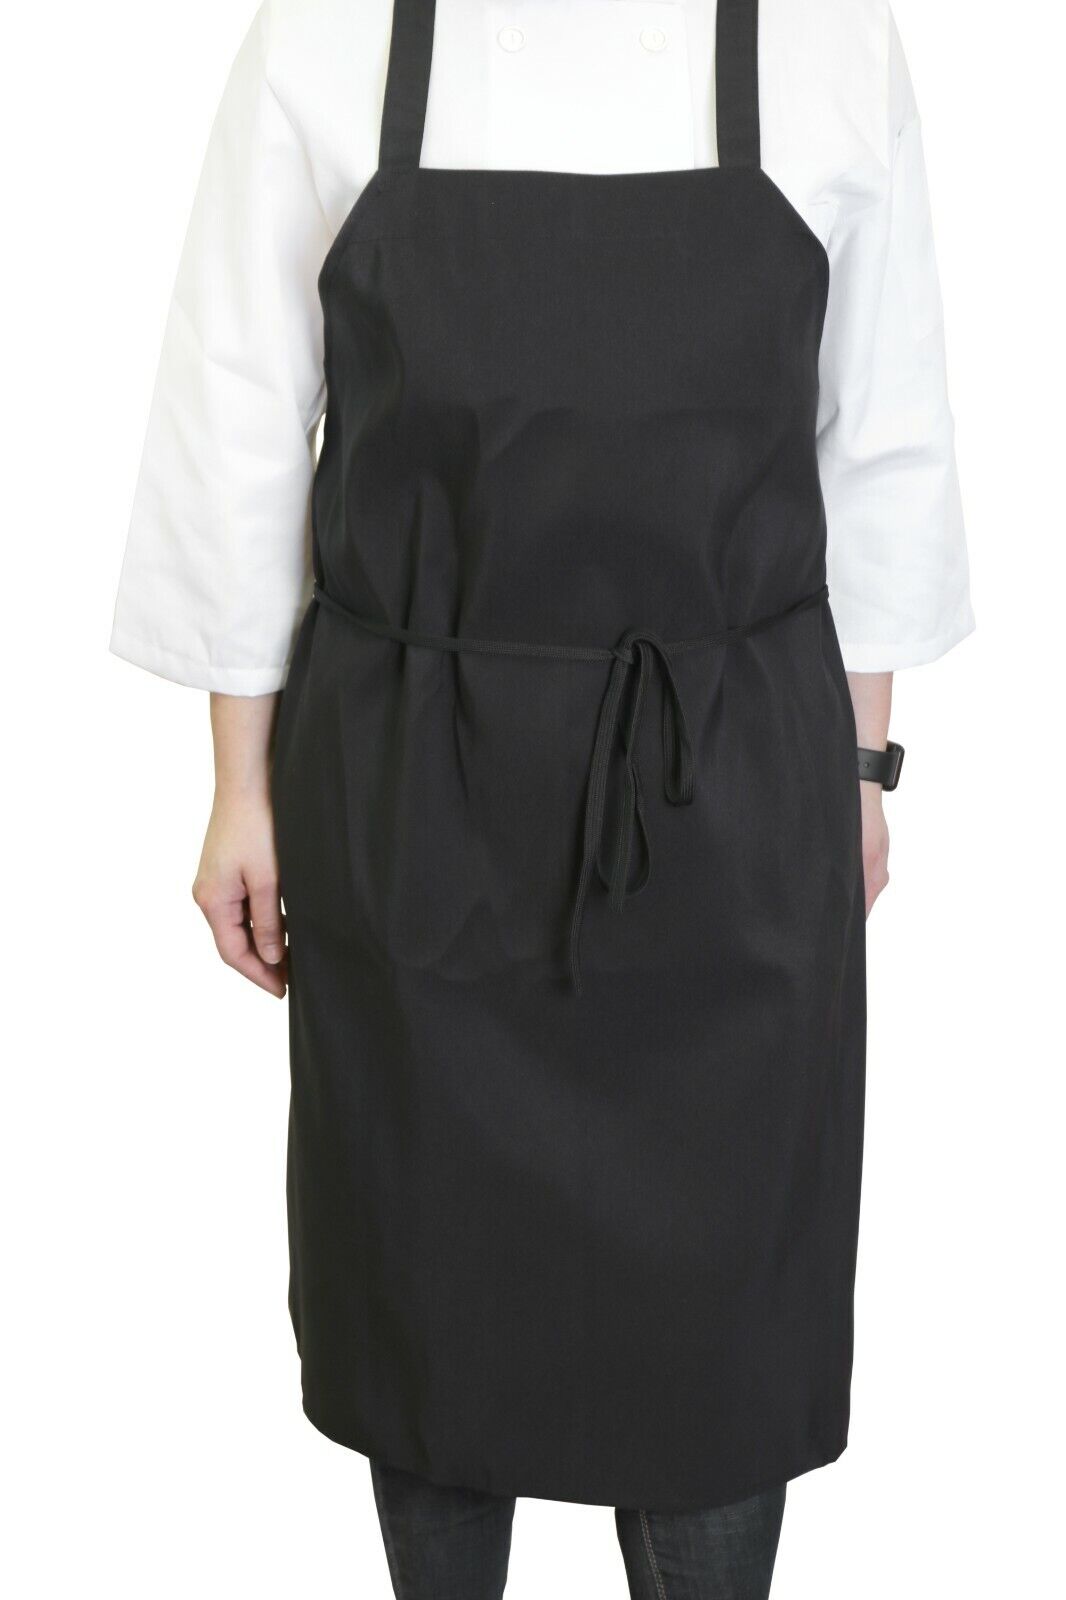 12 Pack of Kitchen Aprons - Full Bib Size Polyester Apron - Black Red or White Arkwright Does Not Apply - фотография #7